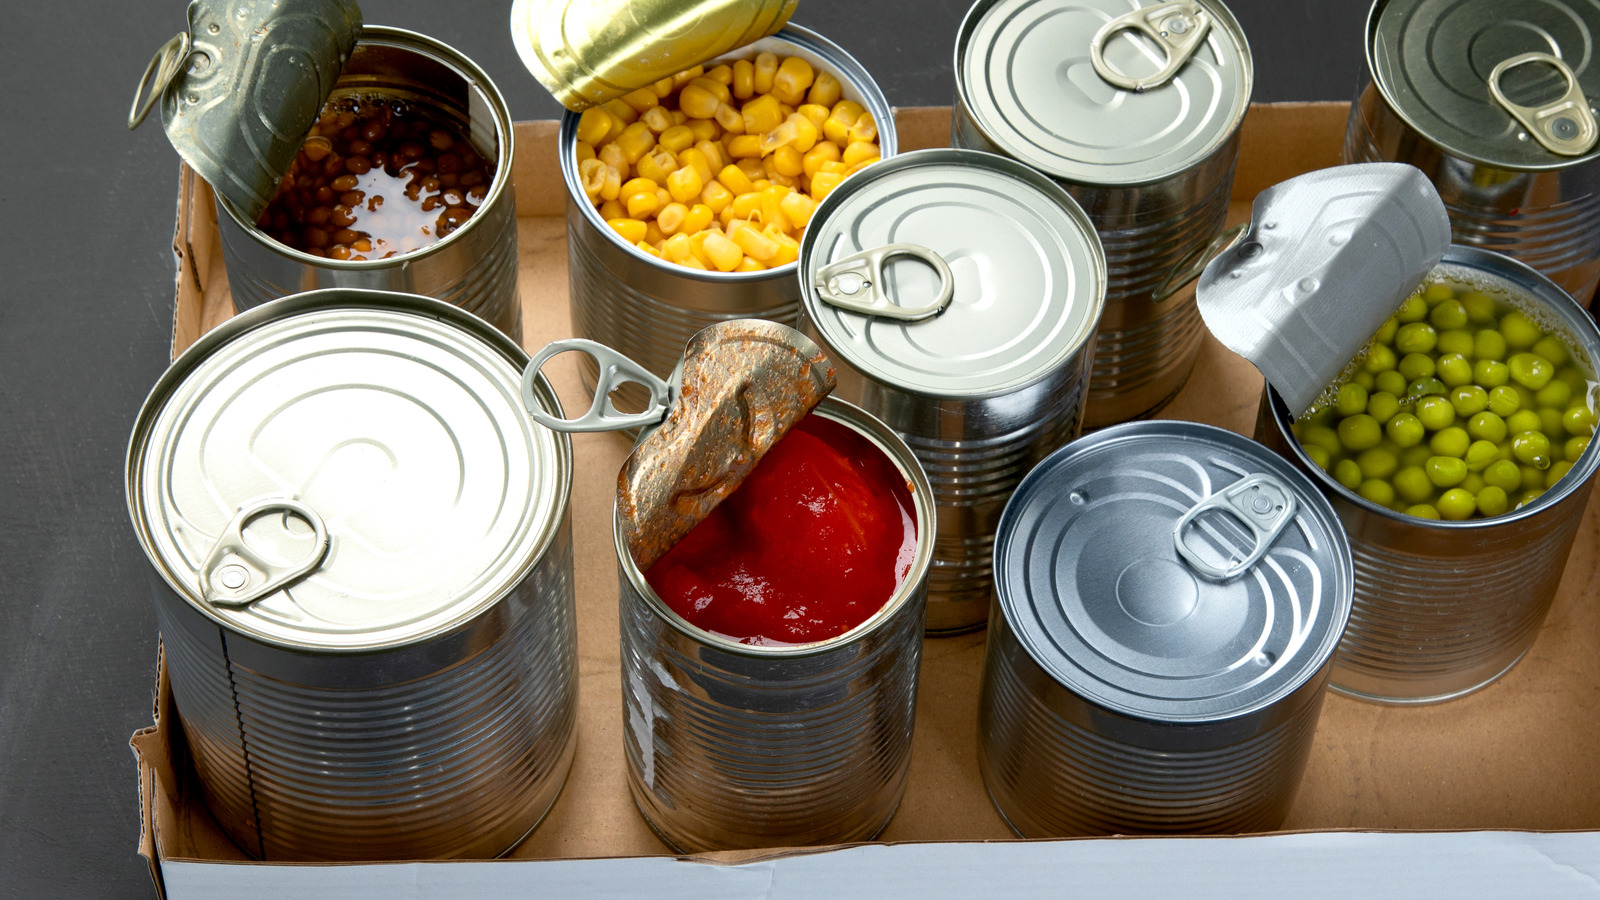 https://www.tastingtable.com/img/gallery/canned-vegetable-hacks-youll-wish-you-knew-sooner/l-intro-1663001099.jpg